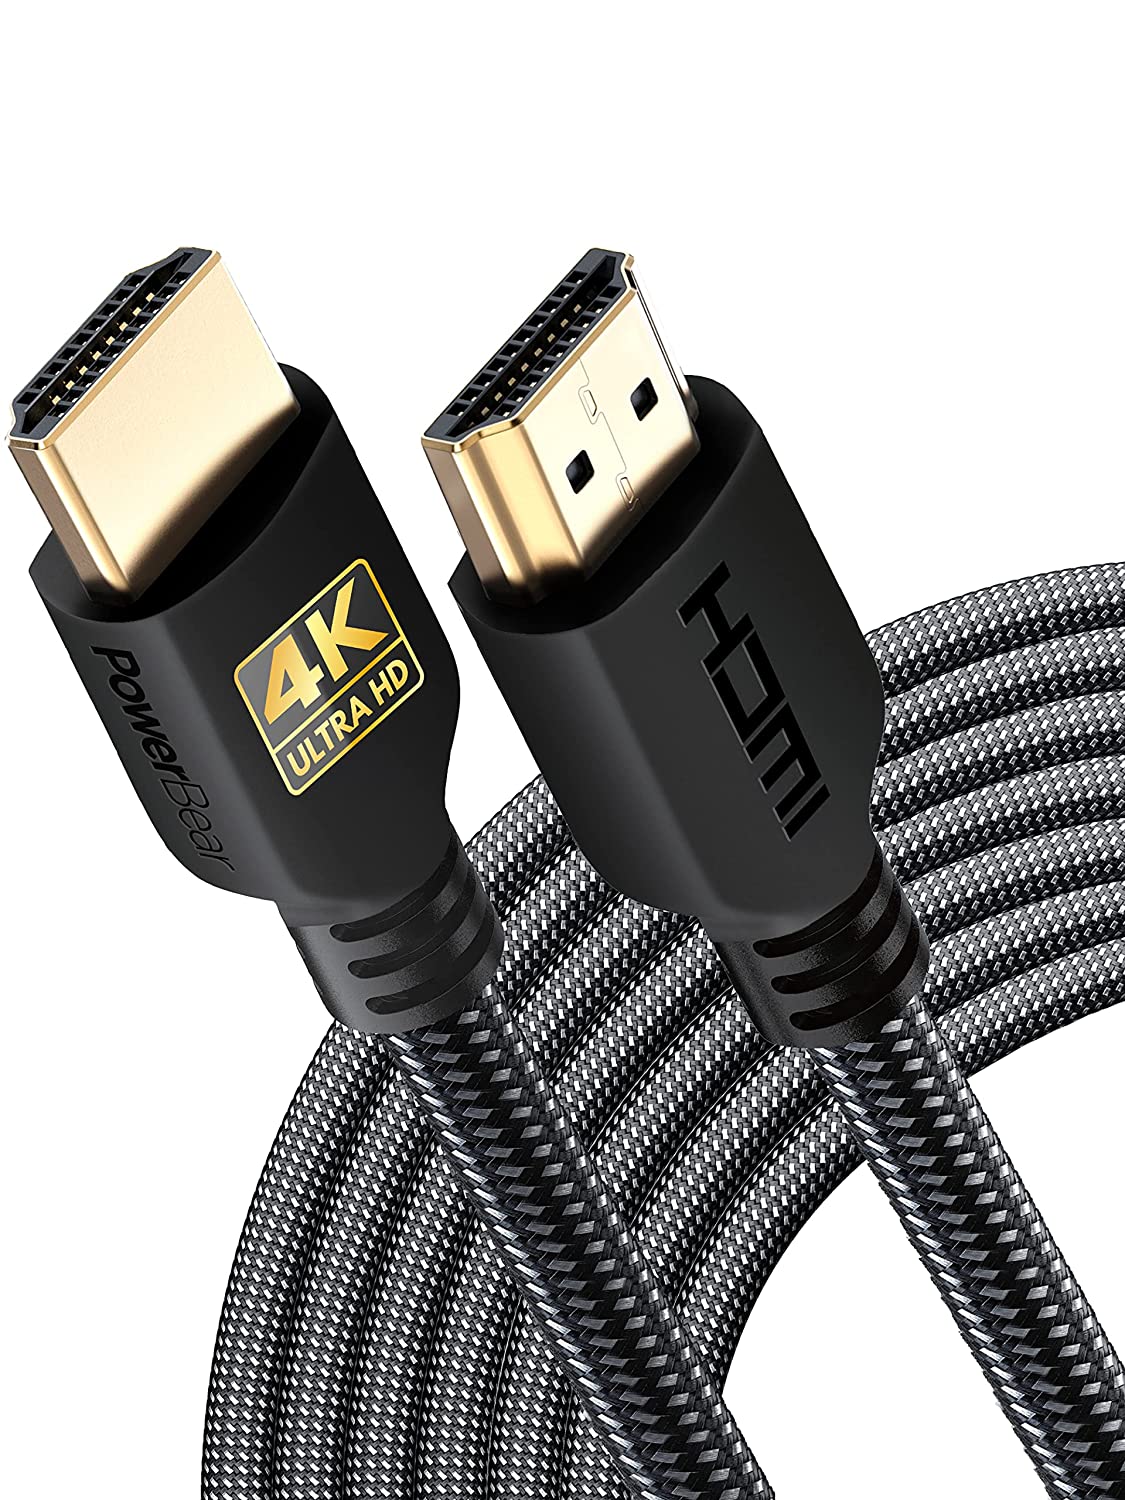  7. PowerBear 4K HDMI Cable 25 ft 